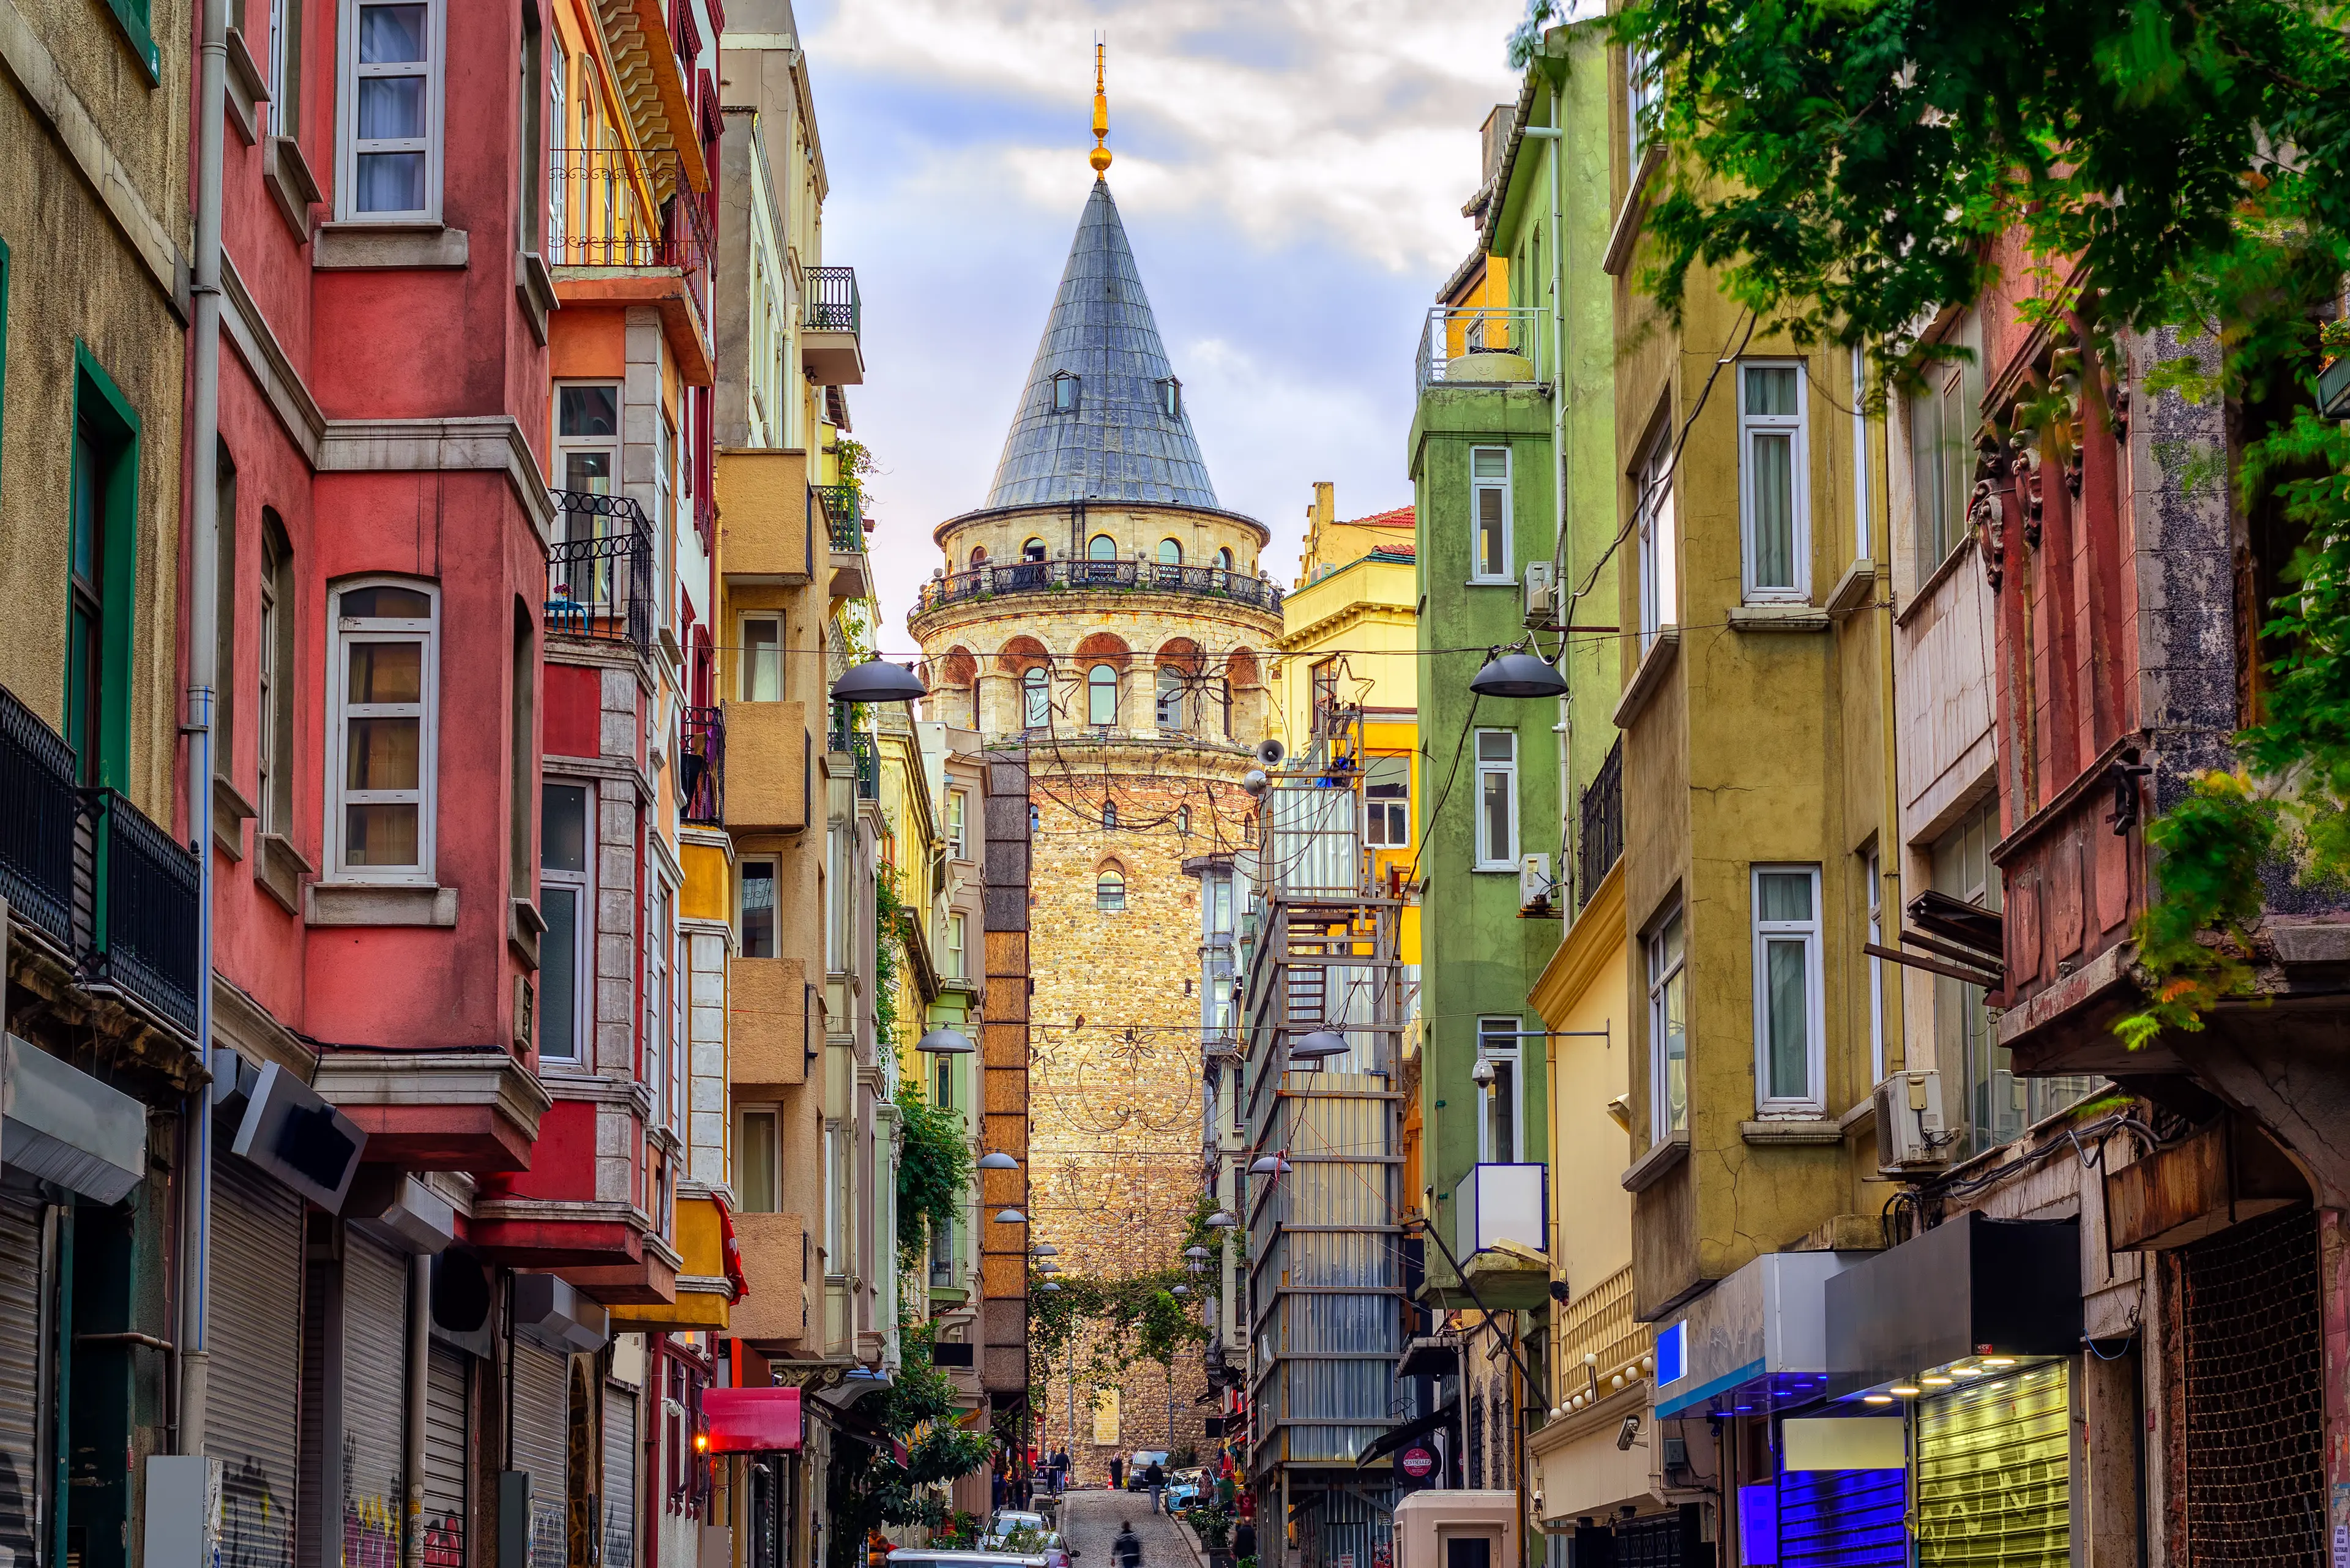 Galata Tower in old town